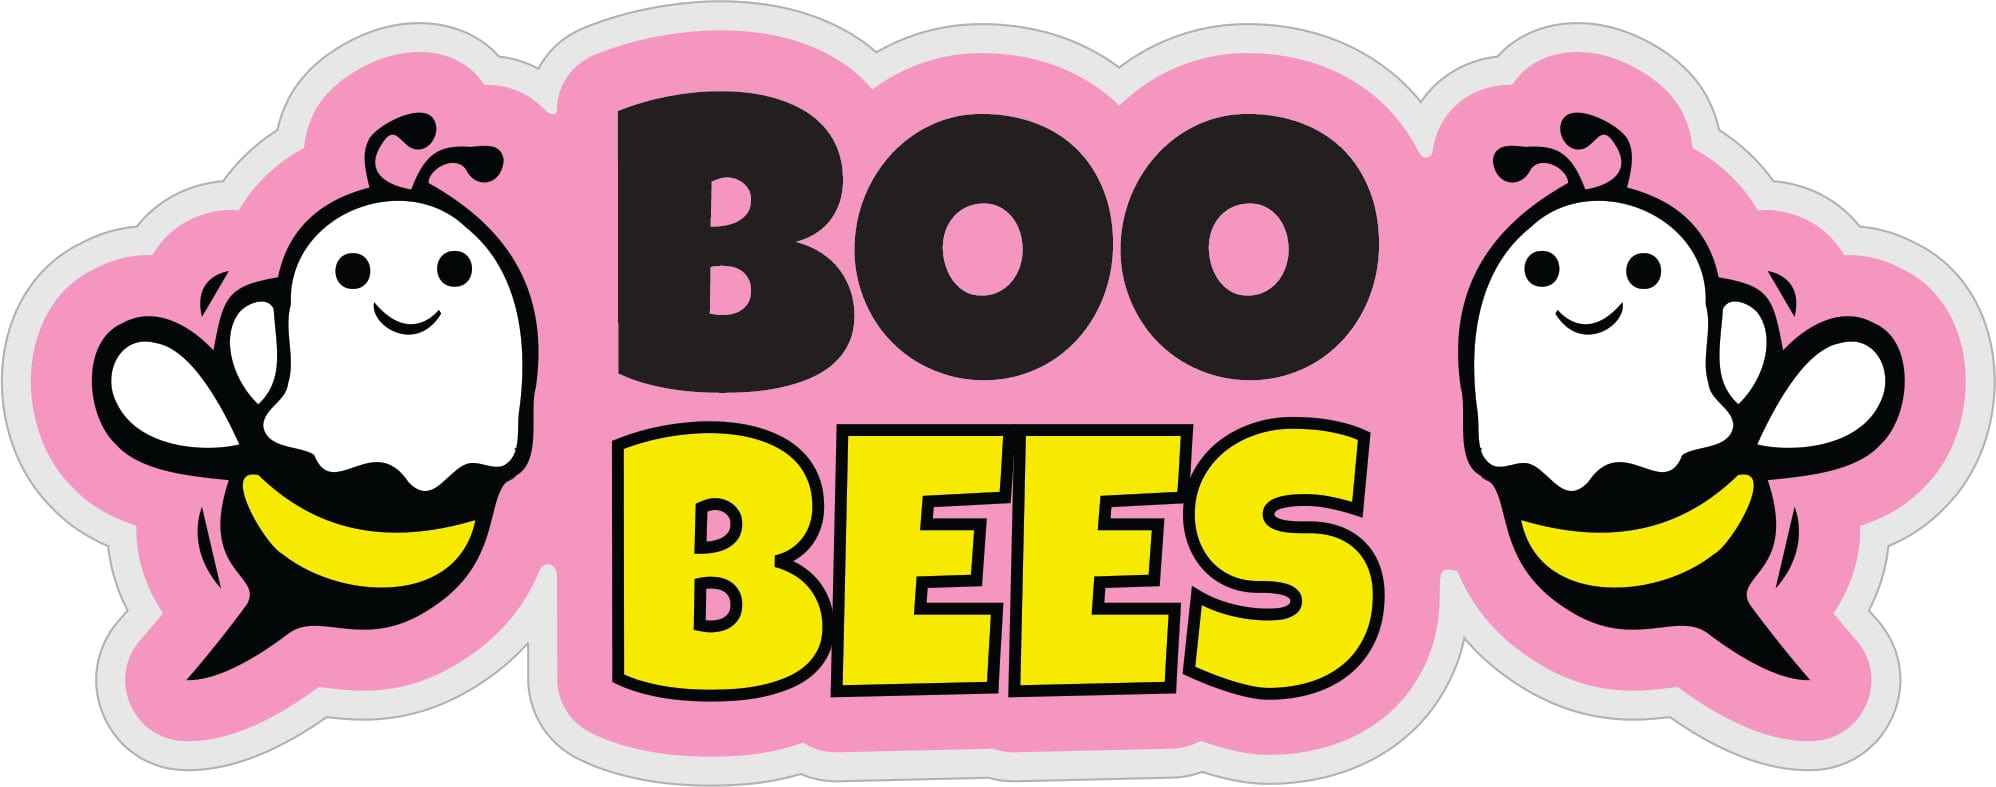 Tactical Gear Junkie Stickers Pink BOO-BEES - 3.5 inch Sticker